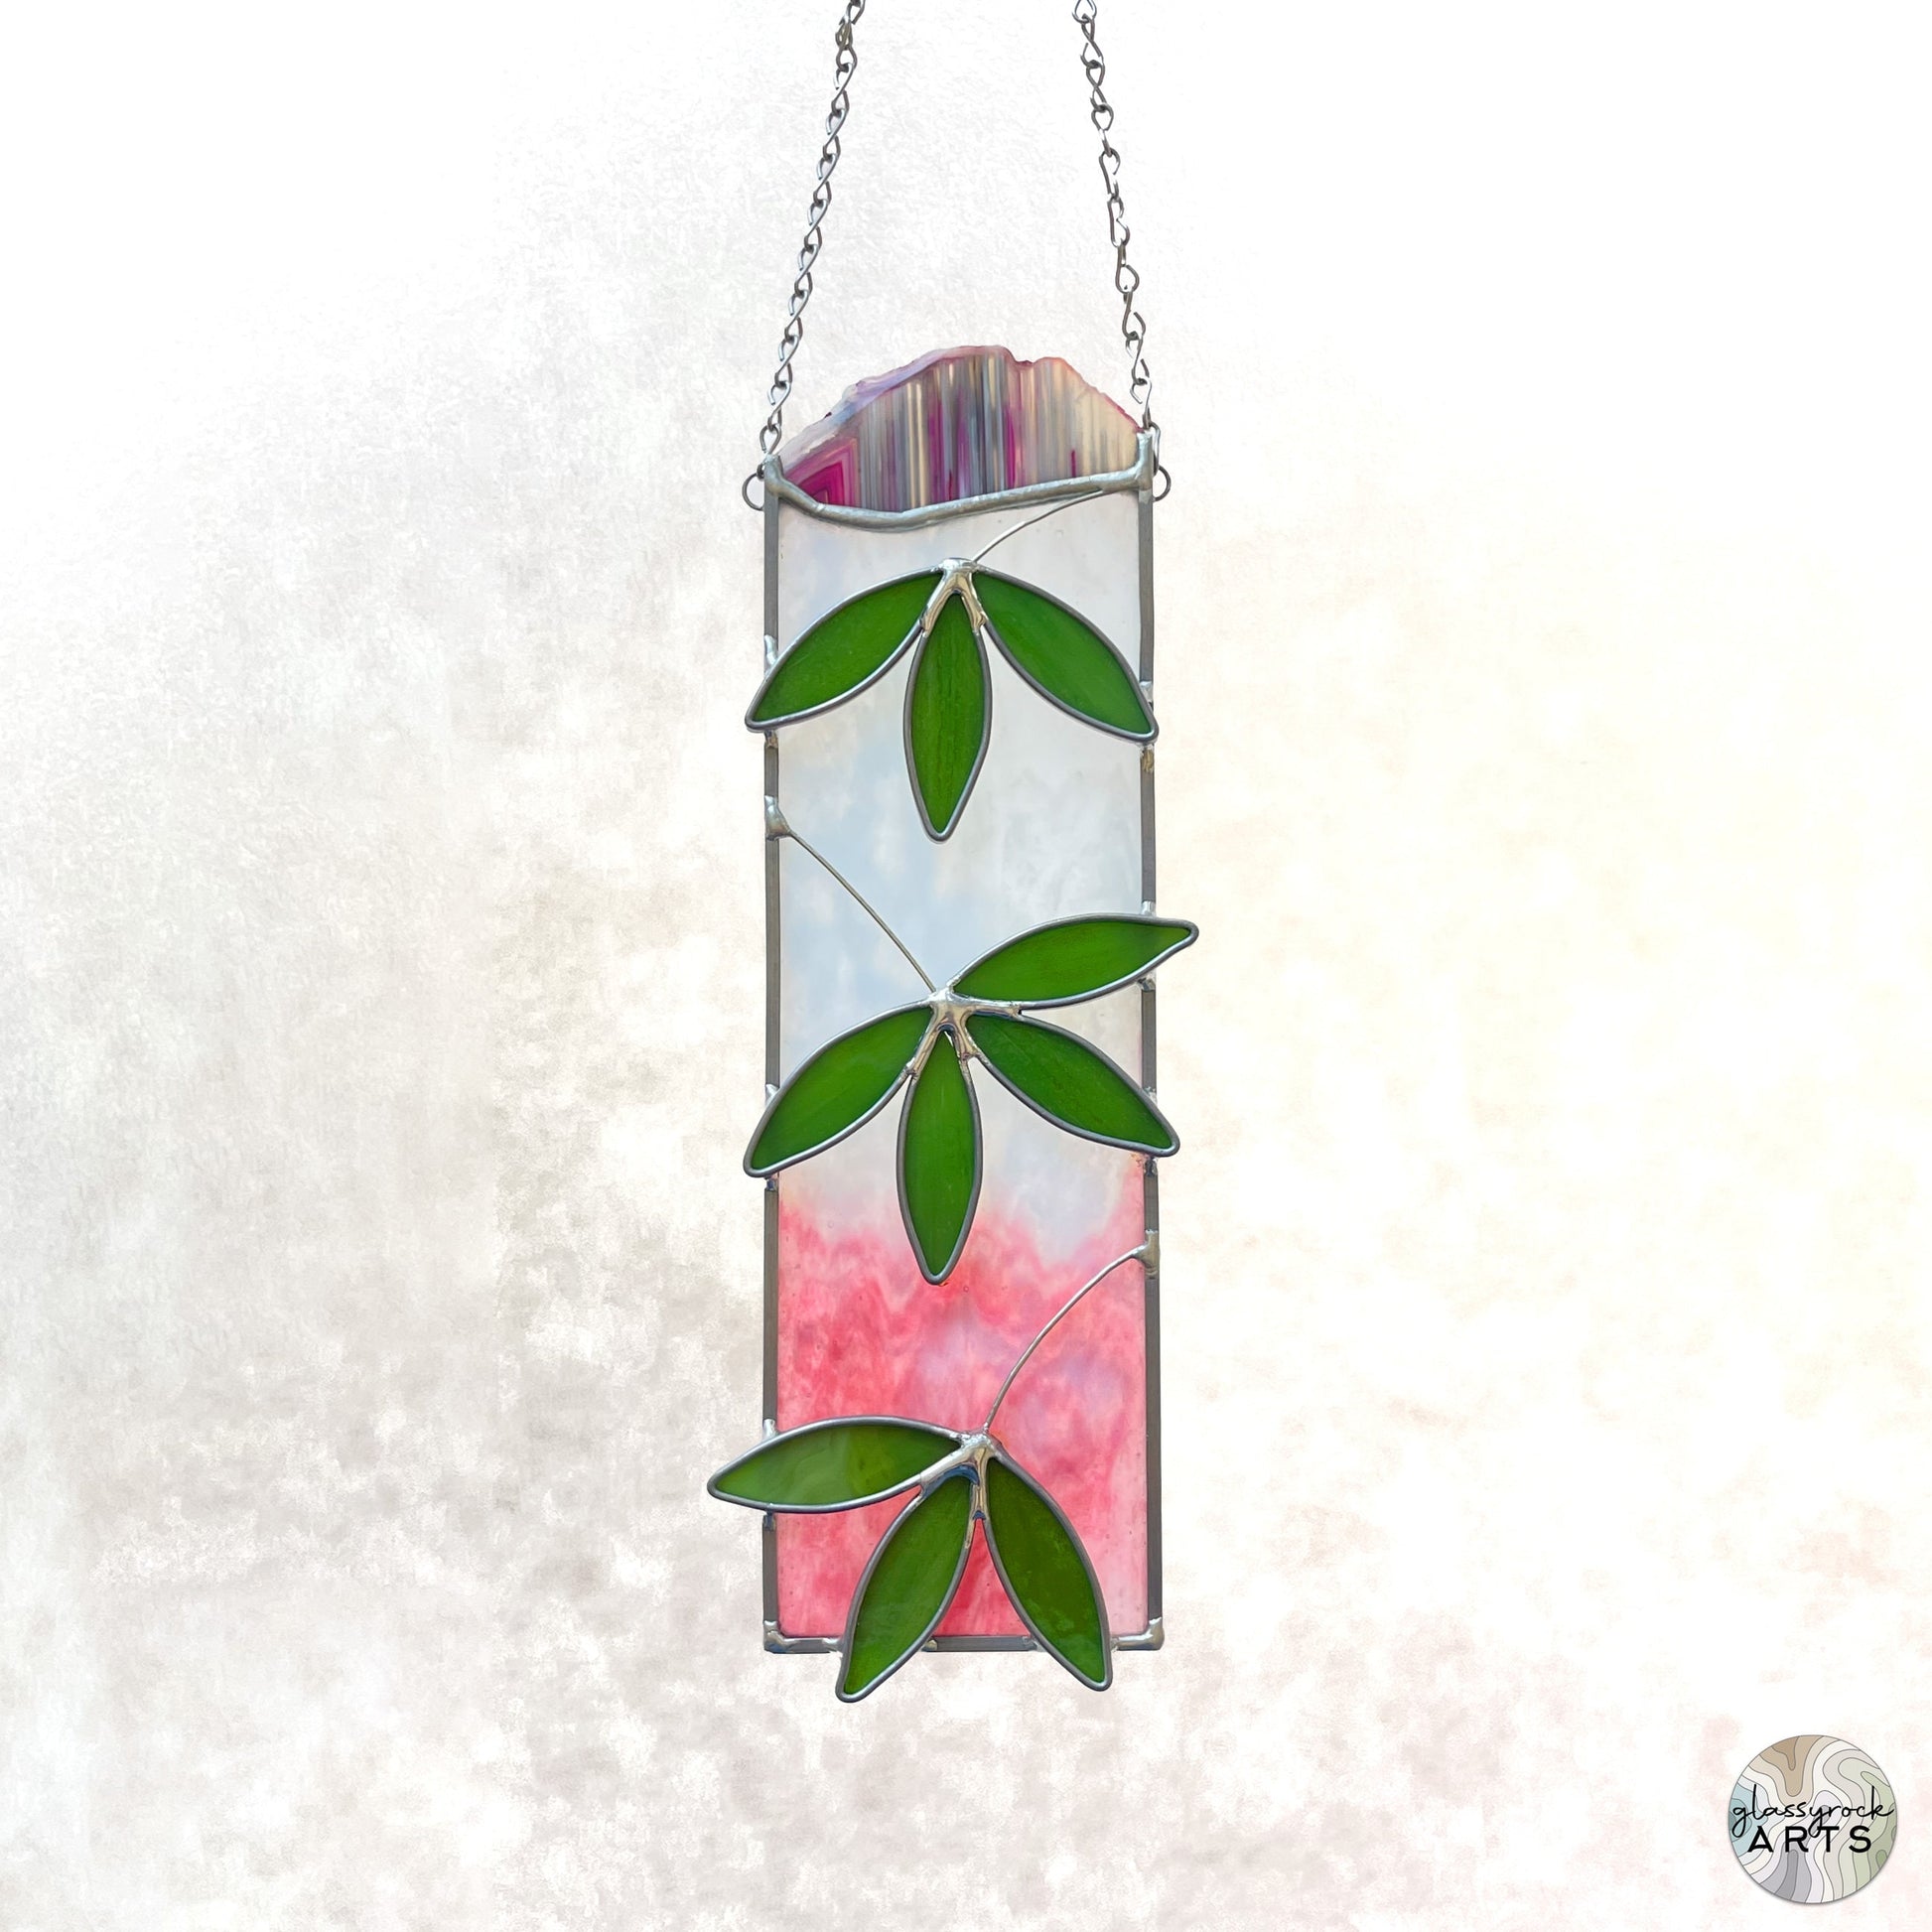 Handmade Agate Tropical Stained Glass Plant Suncatcher, handmade stained glass gift with free shipping, agate decor, gift for plant lover